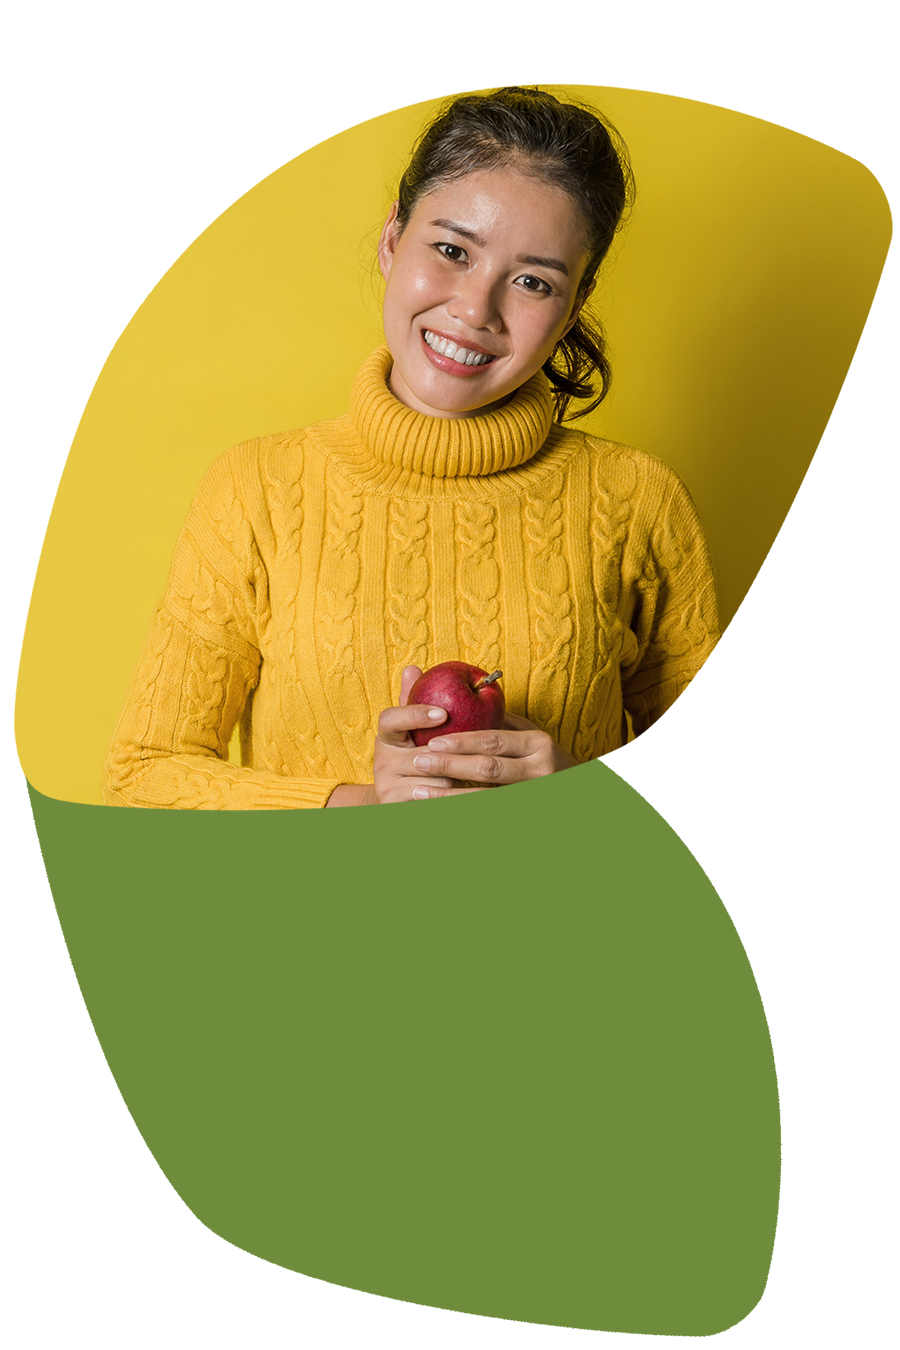 Petal shaped image with woman in yellow sweater on yellow background with red apple